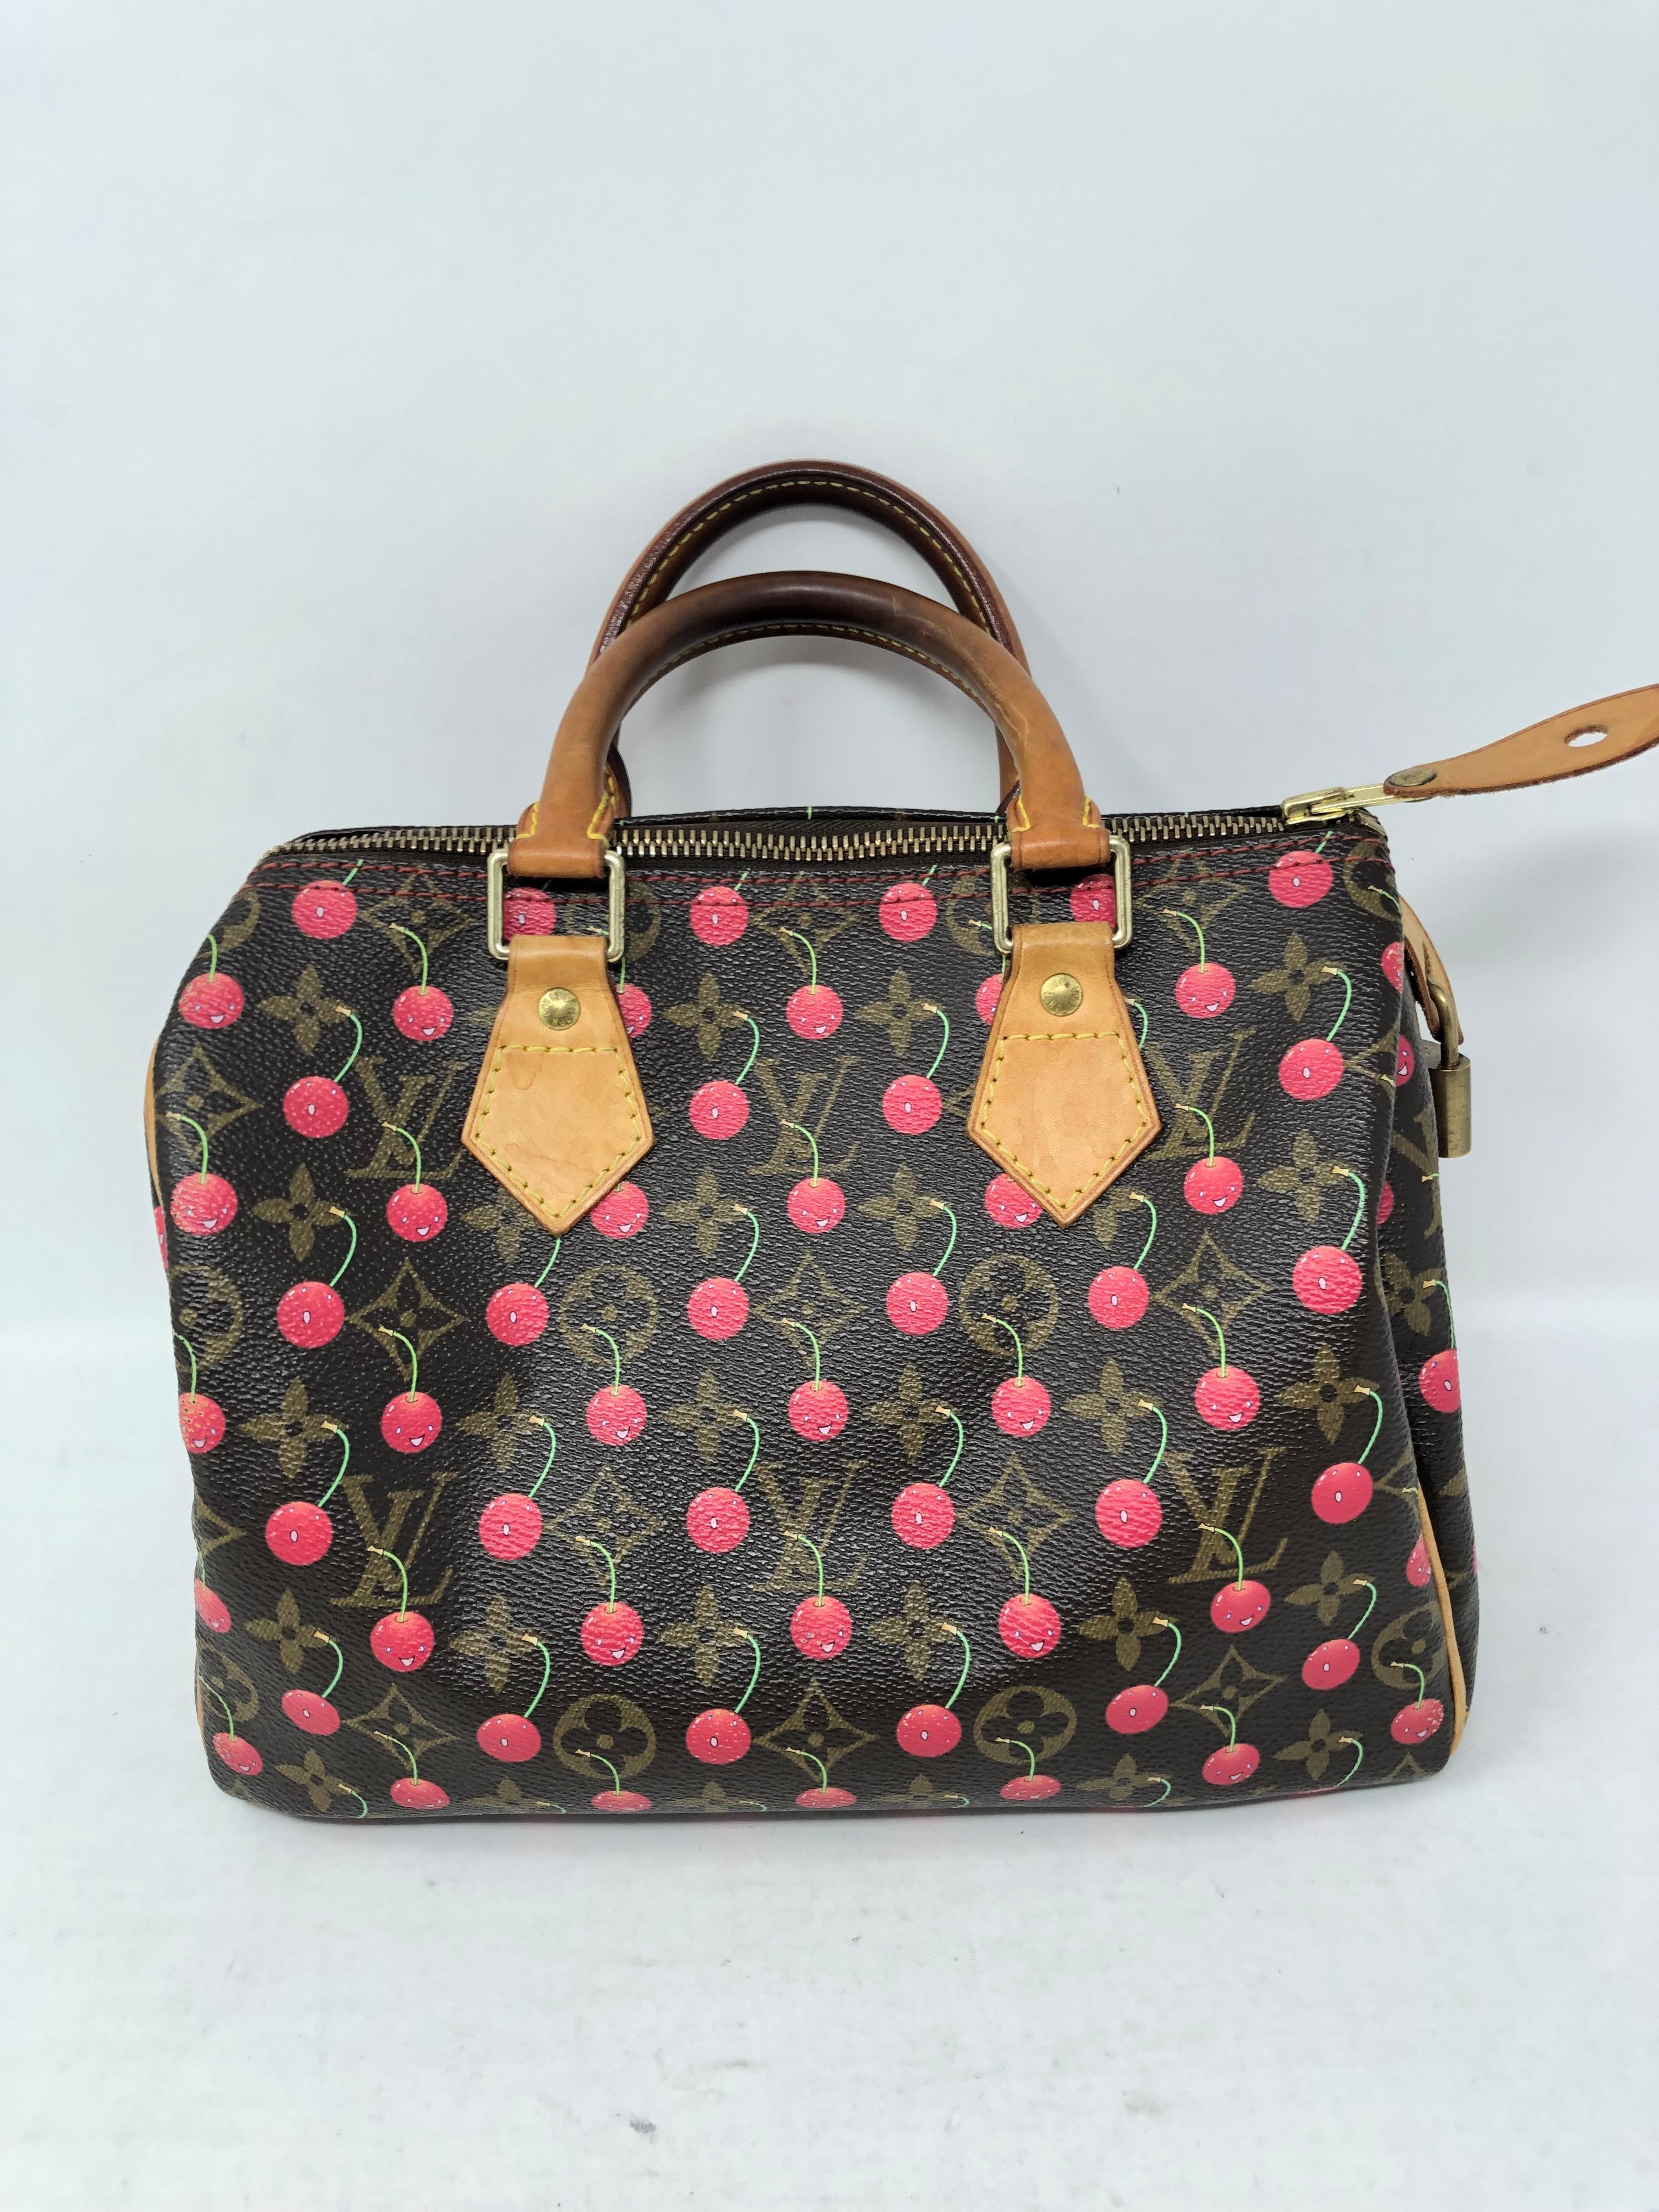 Louis Vuitton Cherry Murakami Speedy 25. Vintage from 2005. Handles have darkened with patina. Some wear throughout but lots of life left. Cute design from limited collection. Collector's piece. Guaranteed authentic.